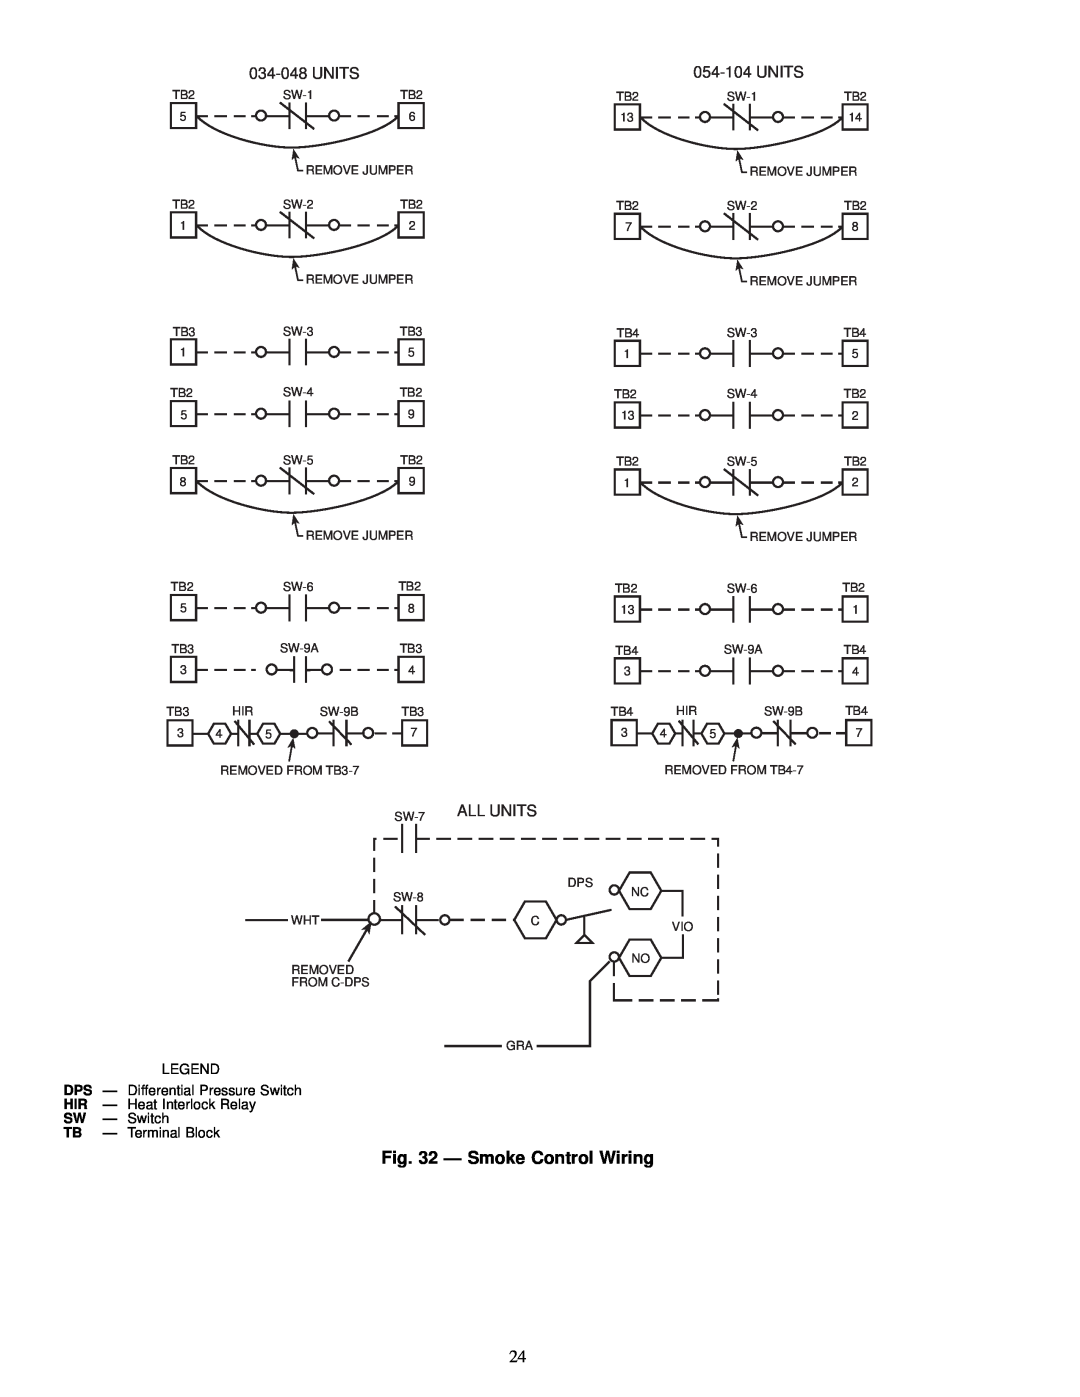 Carrier JK034-074, 50FK, 48FK specifications Ð Smoke Control Wiring, All Units 